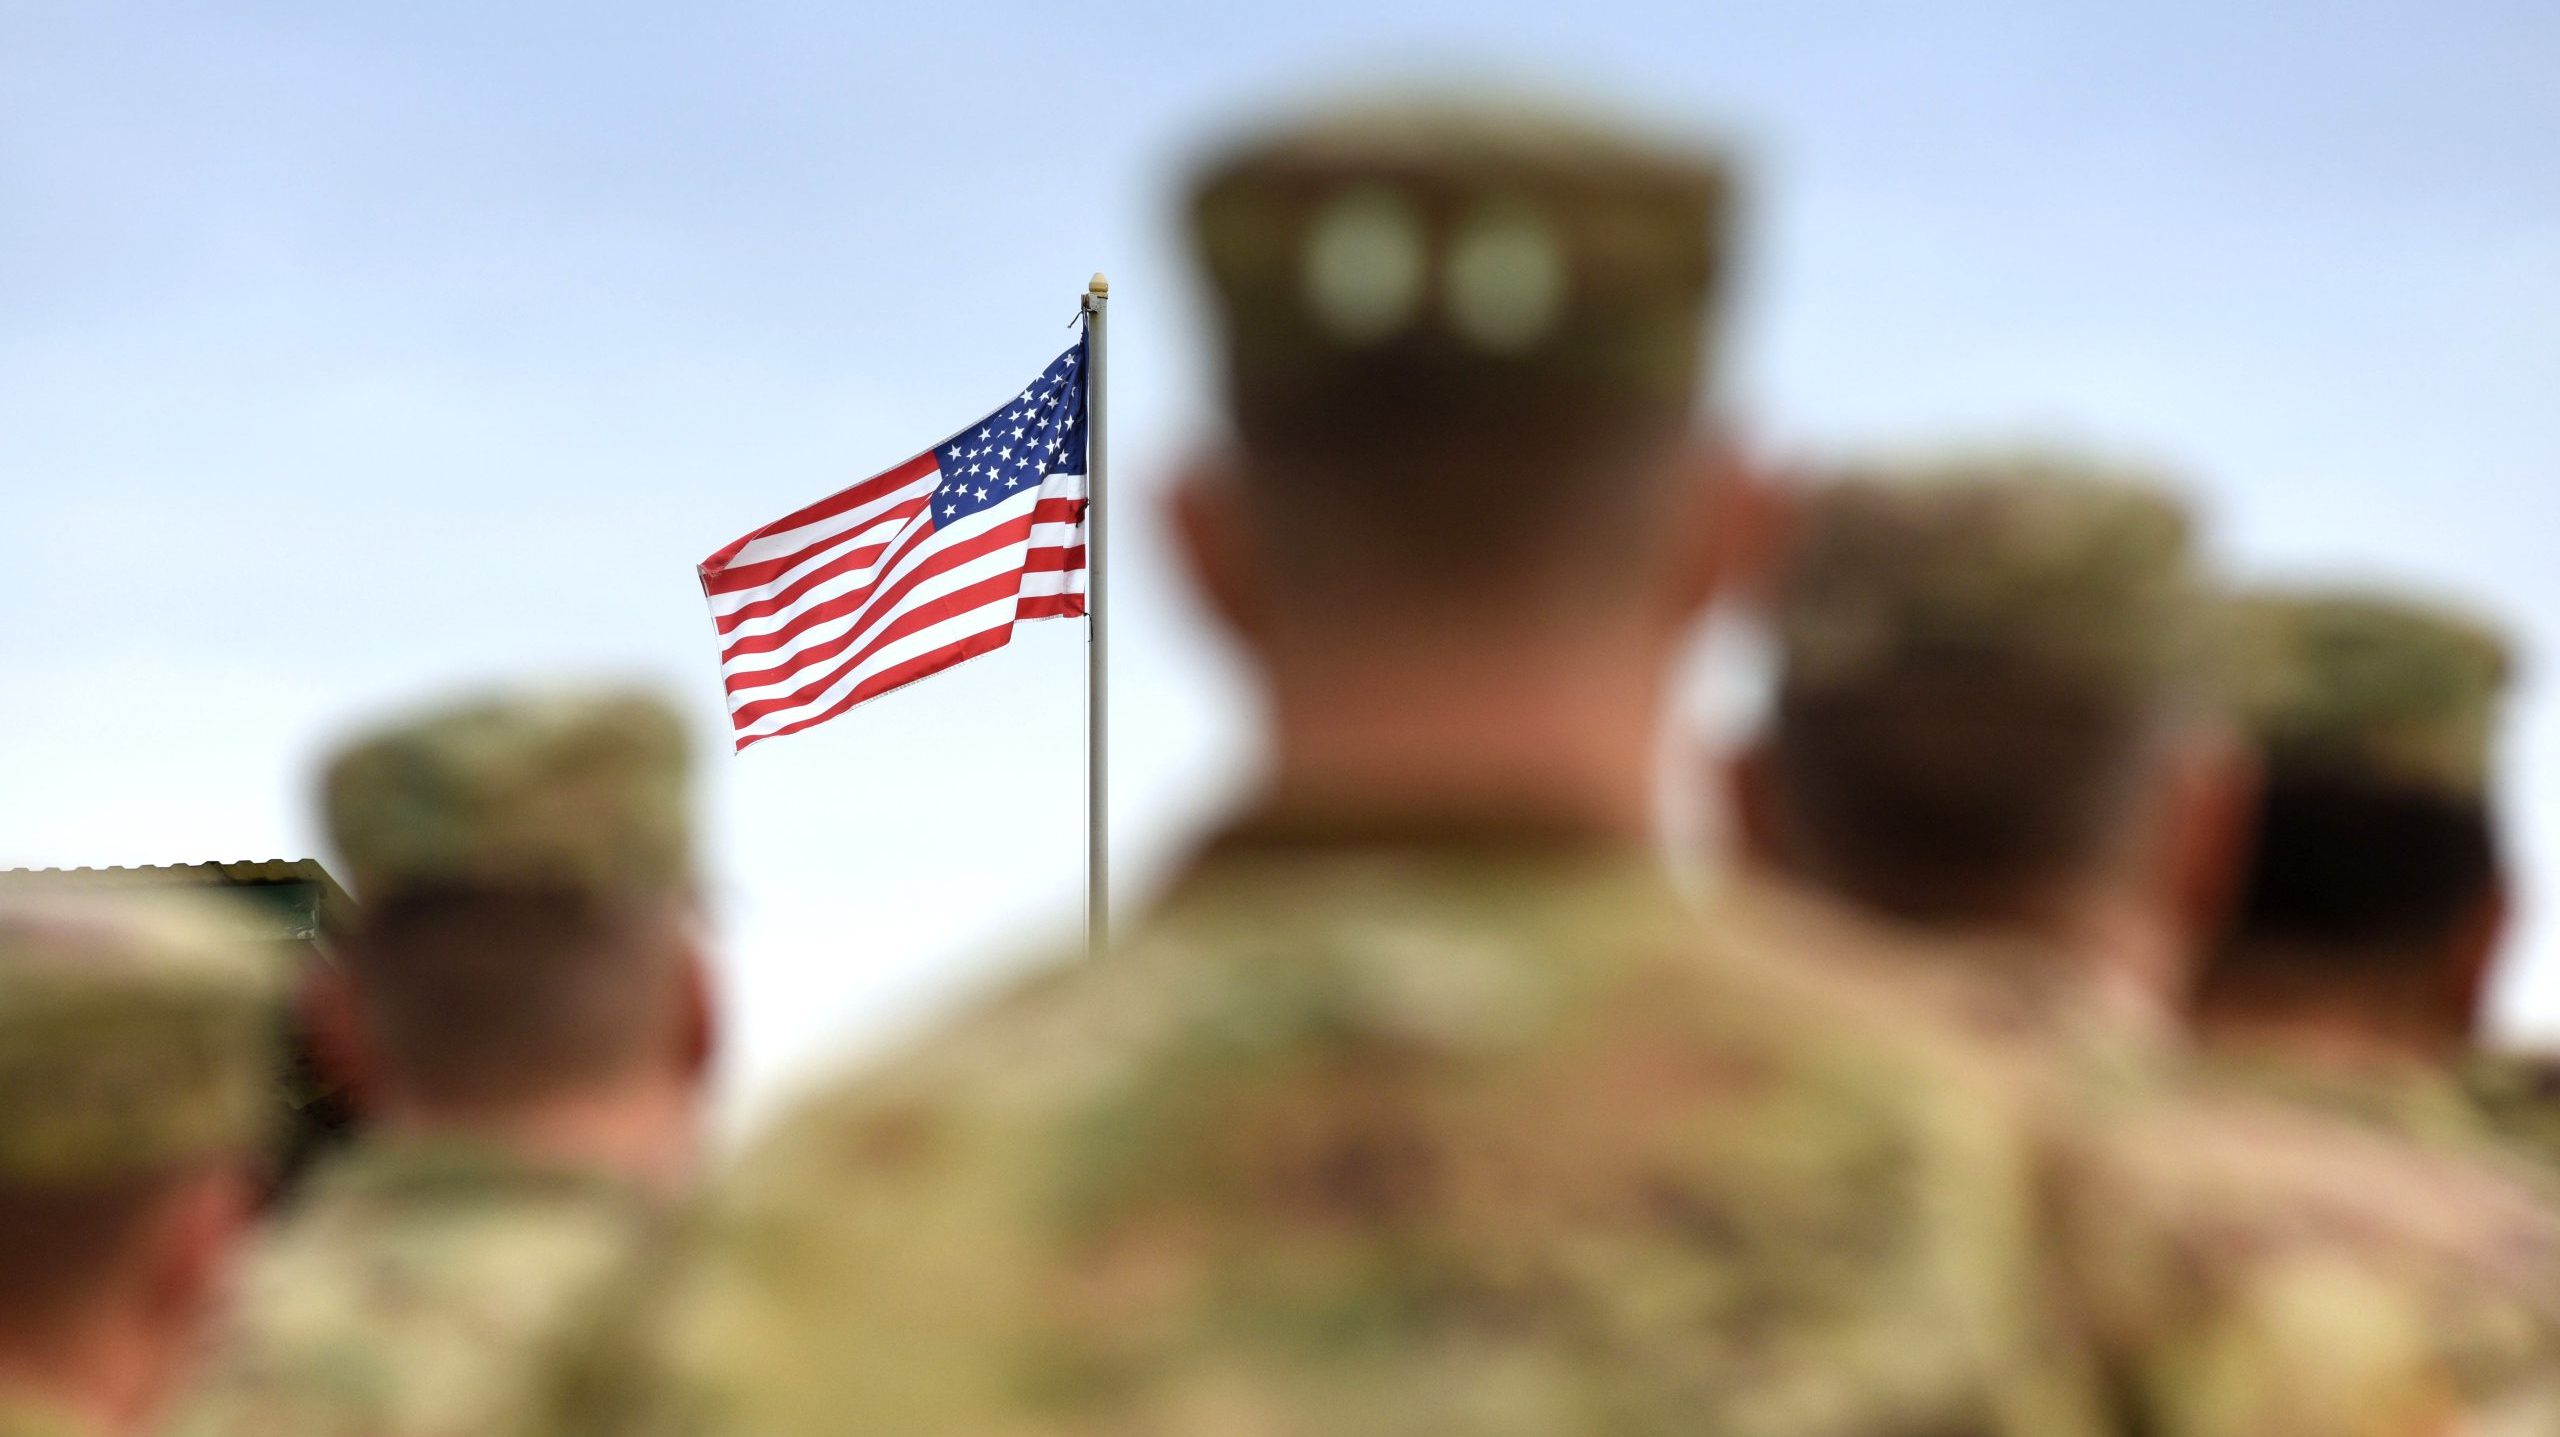 American Soldiers and US Flag. US Army